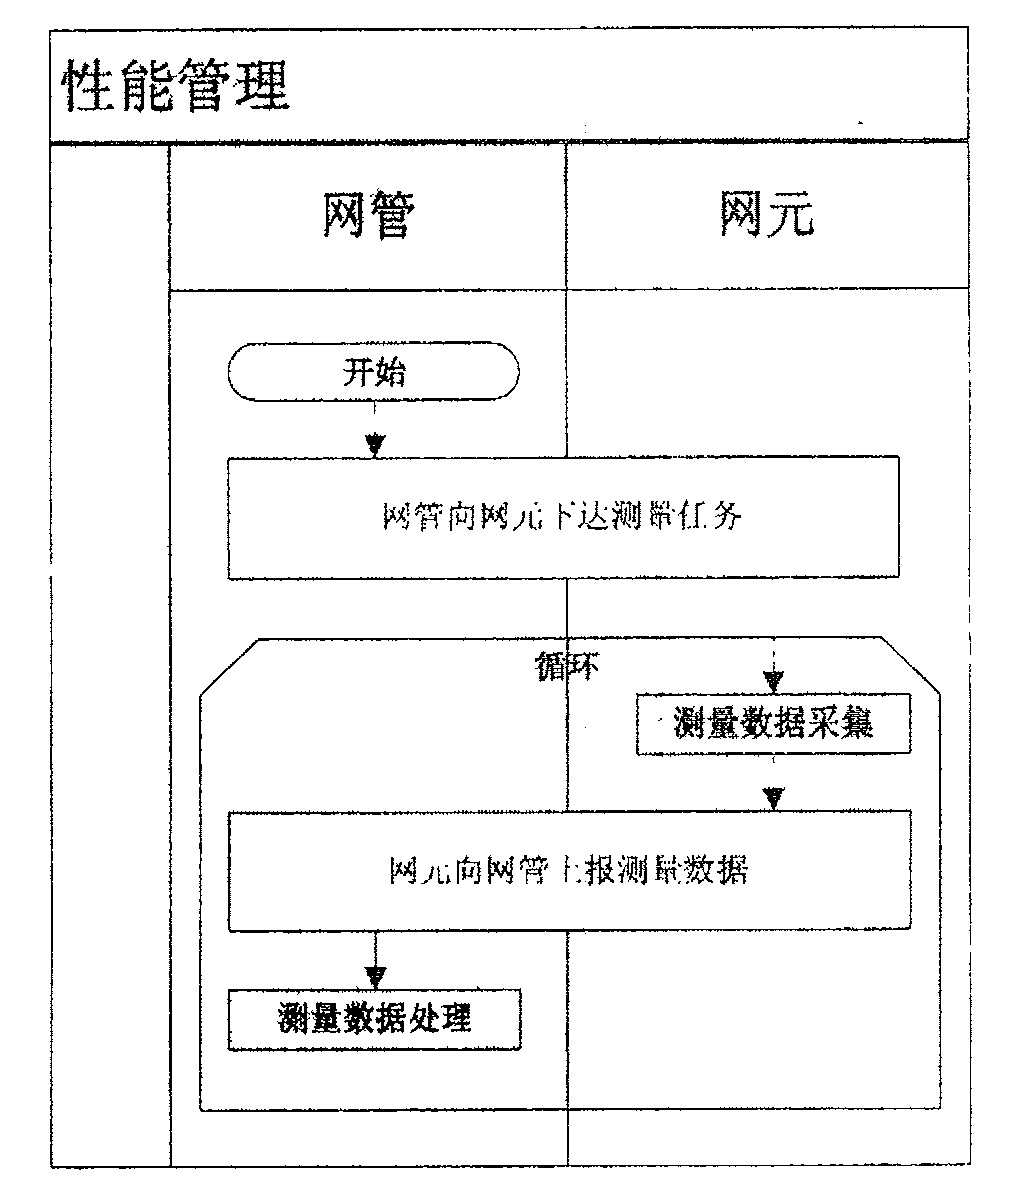 Method for implementing configurational performance measurement in communication system